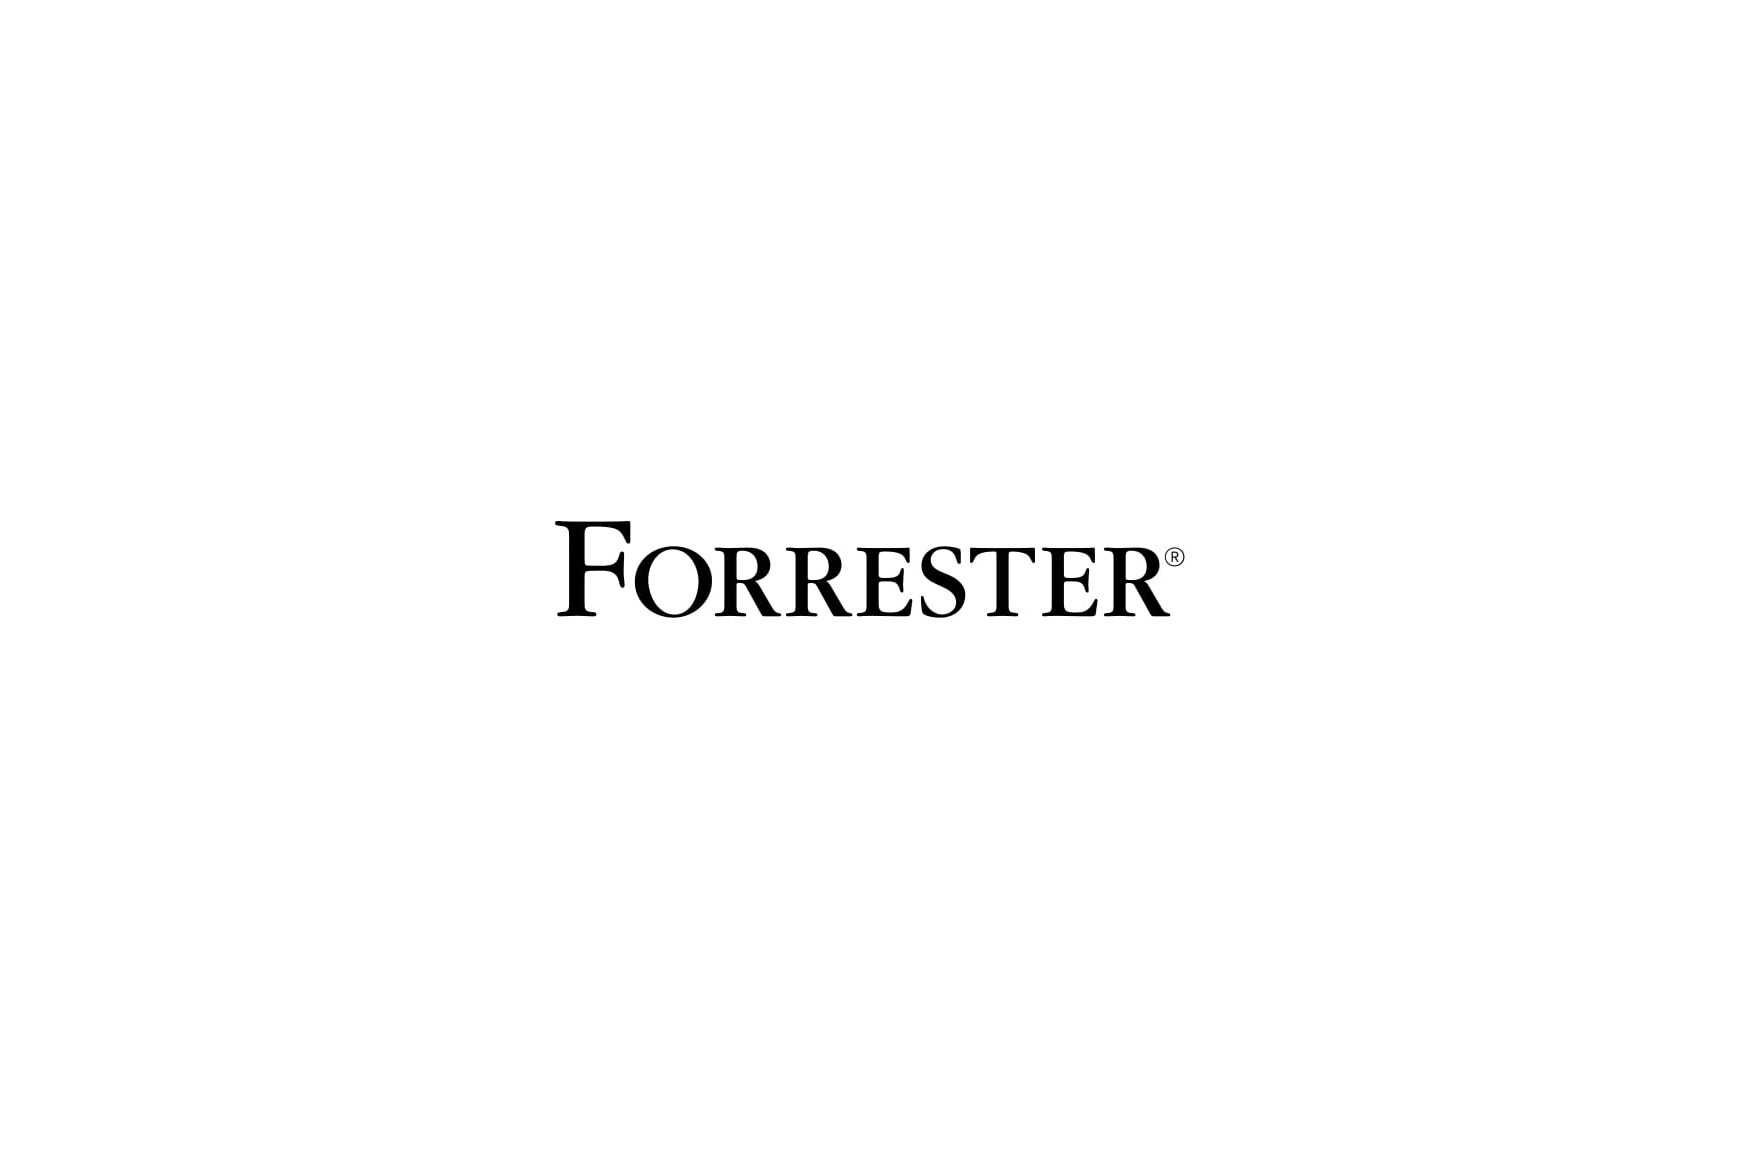 Talkdesk Named Leader in 2020 Forrester Wave for Contact Center as a Service